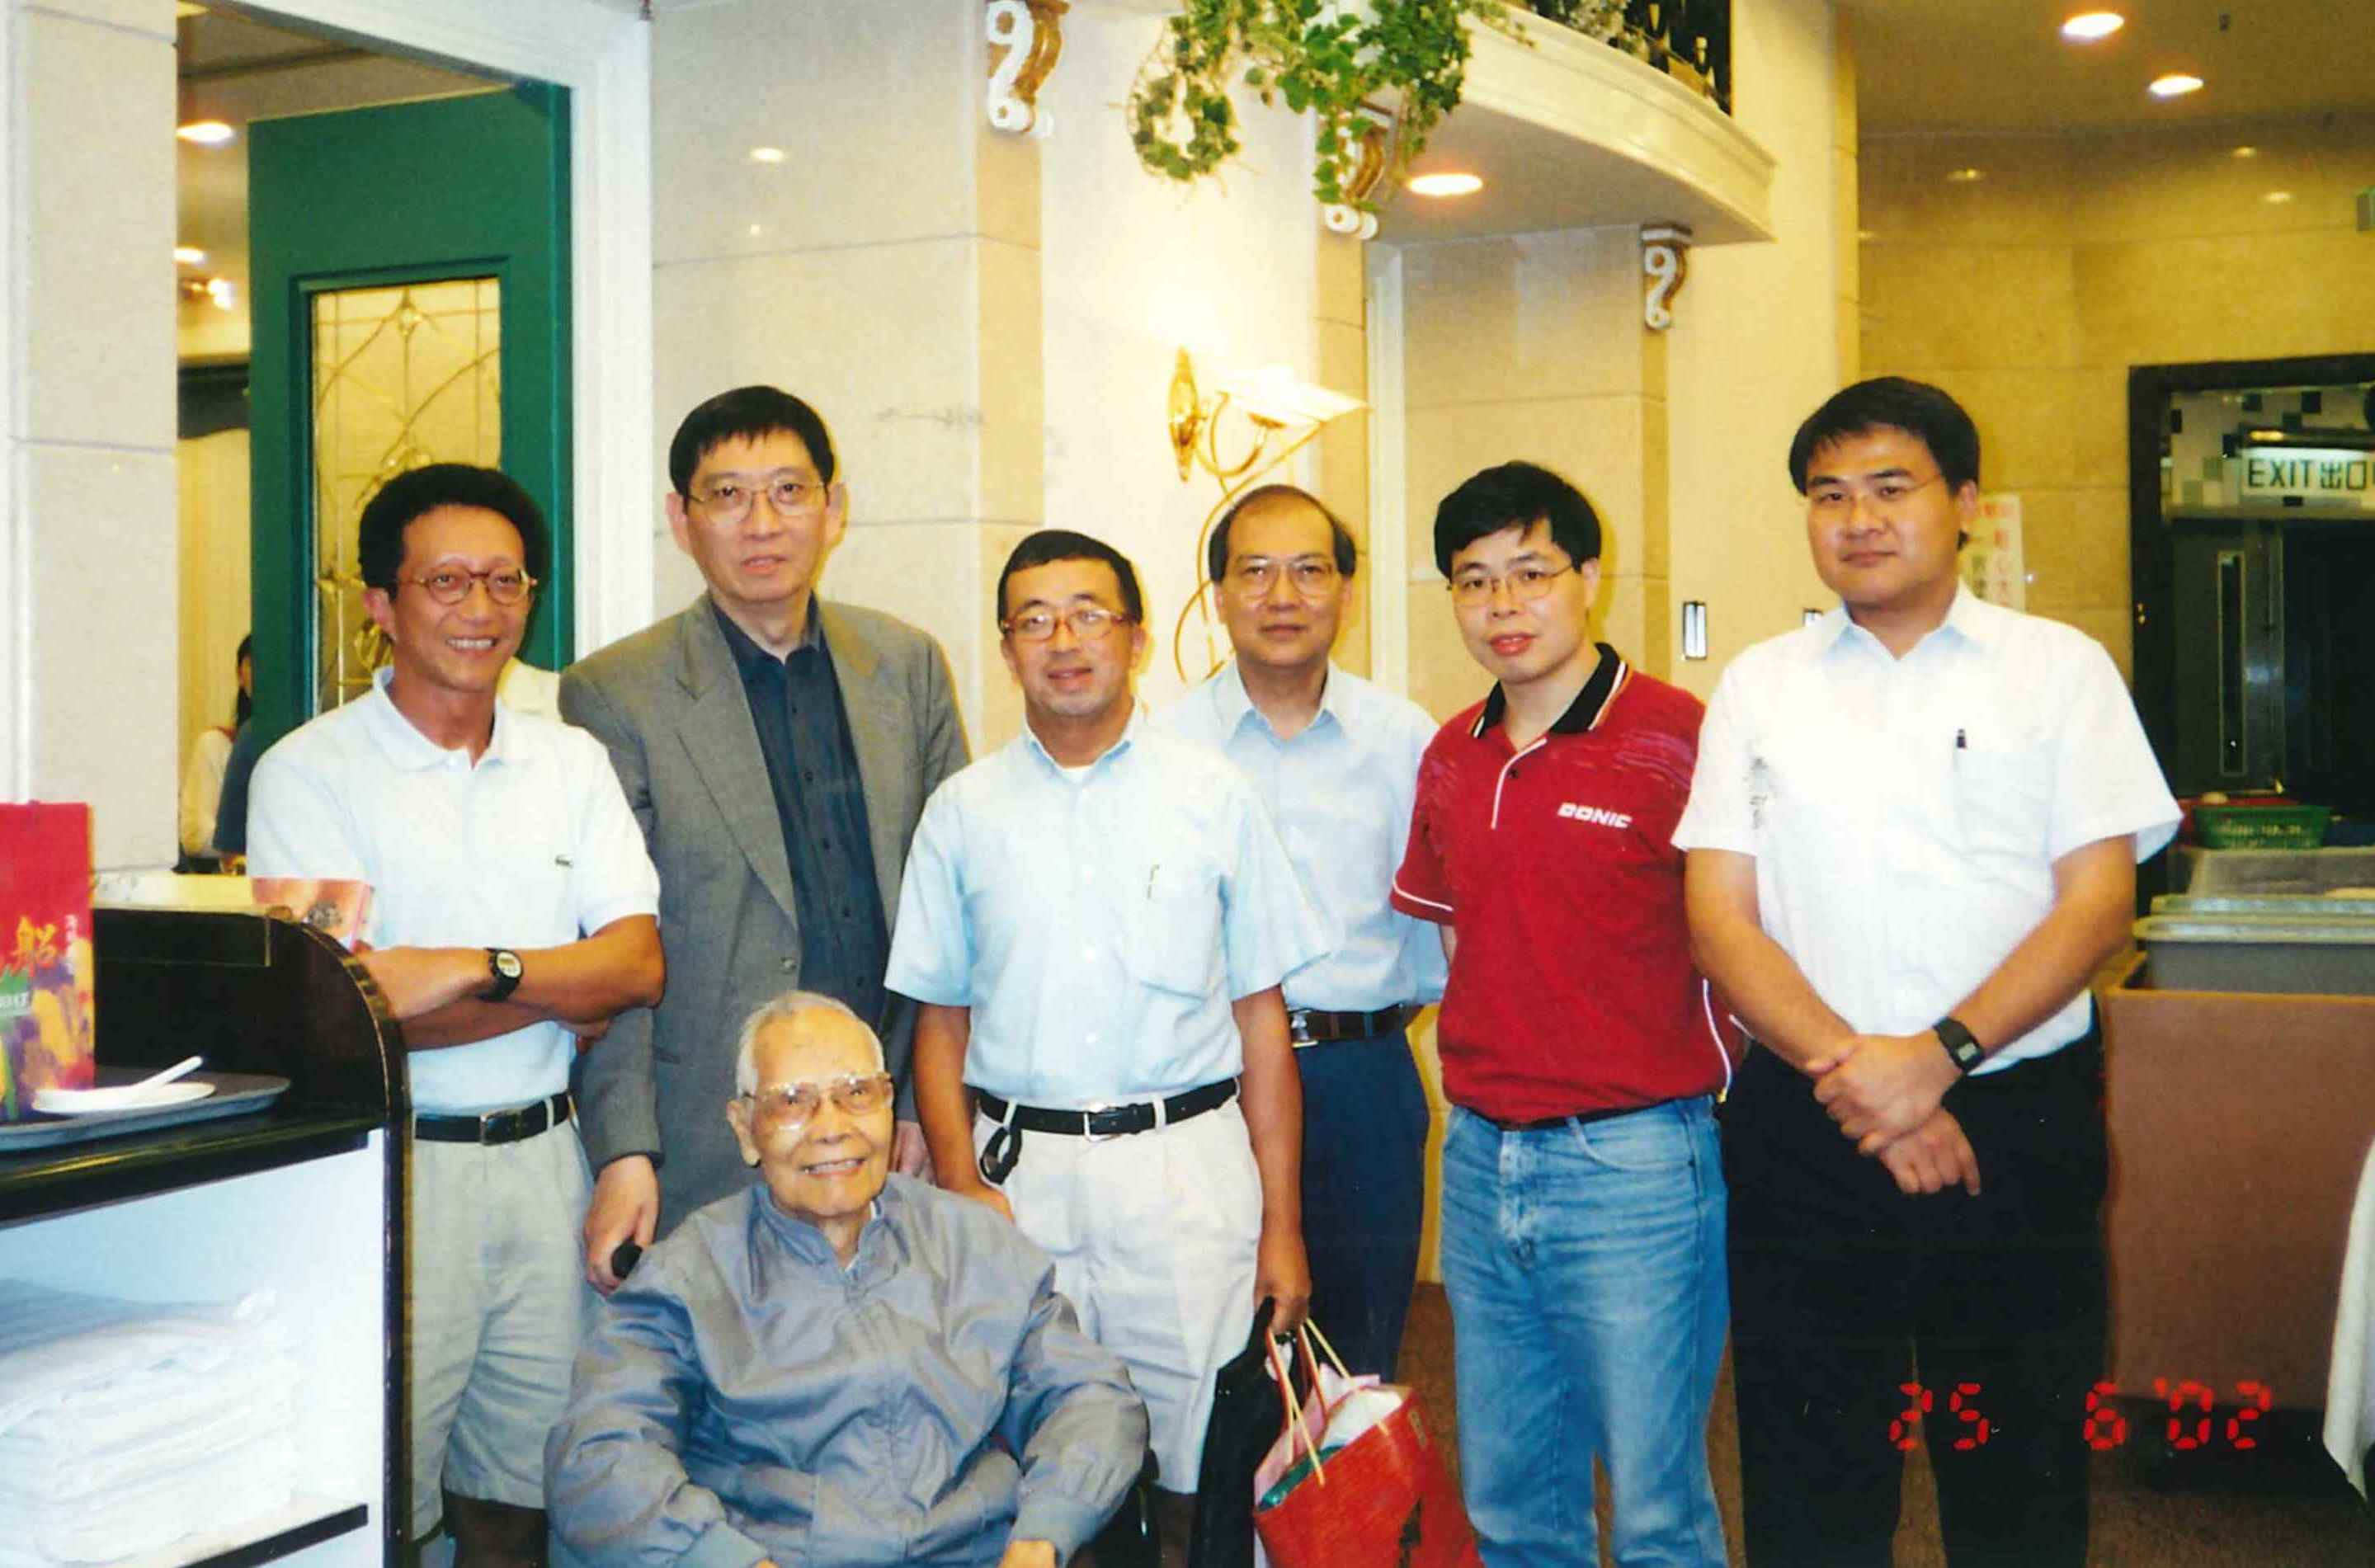 Farewell party of Dr C.L. Chan